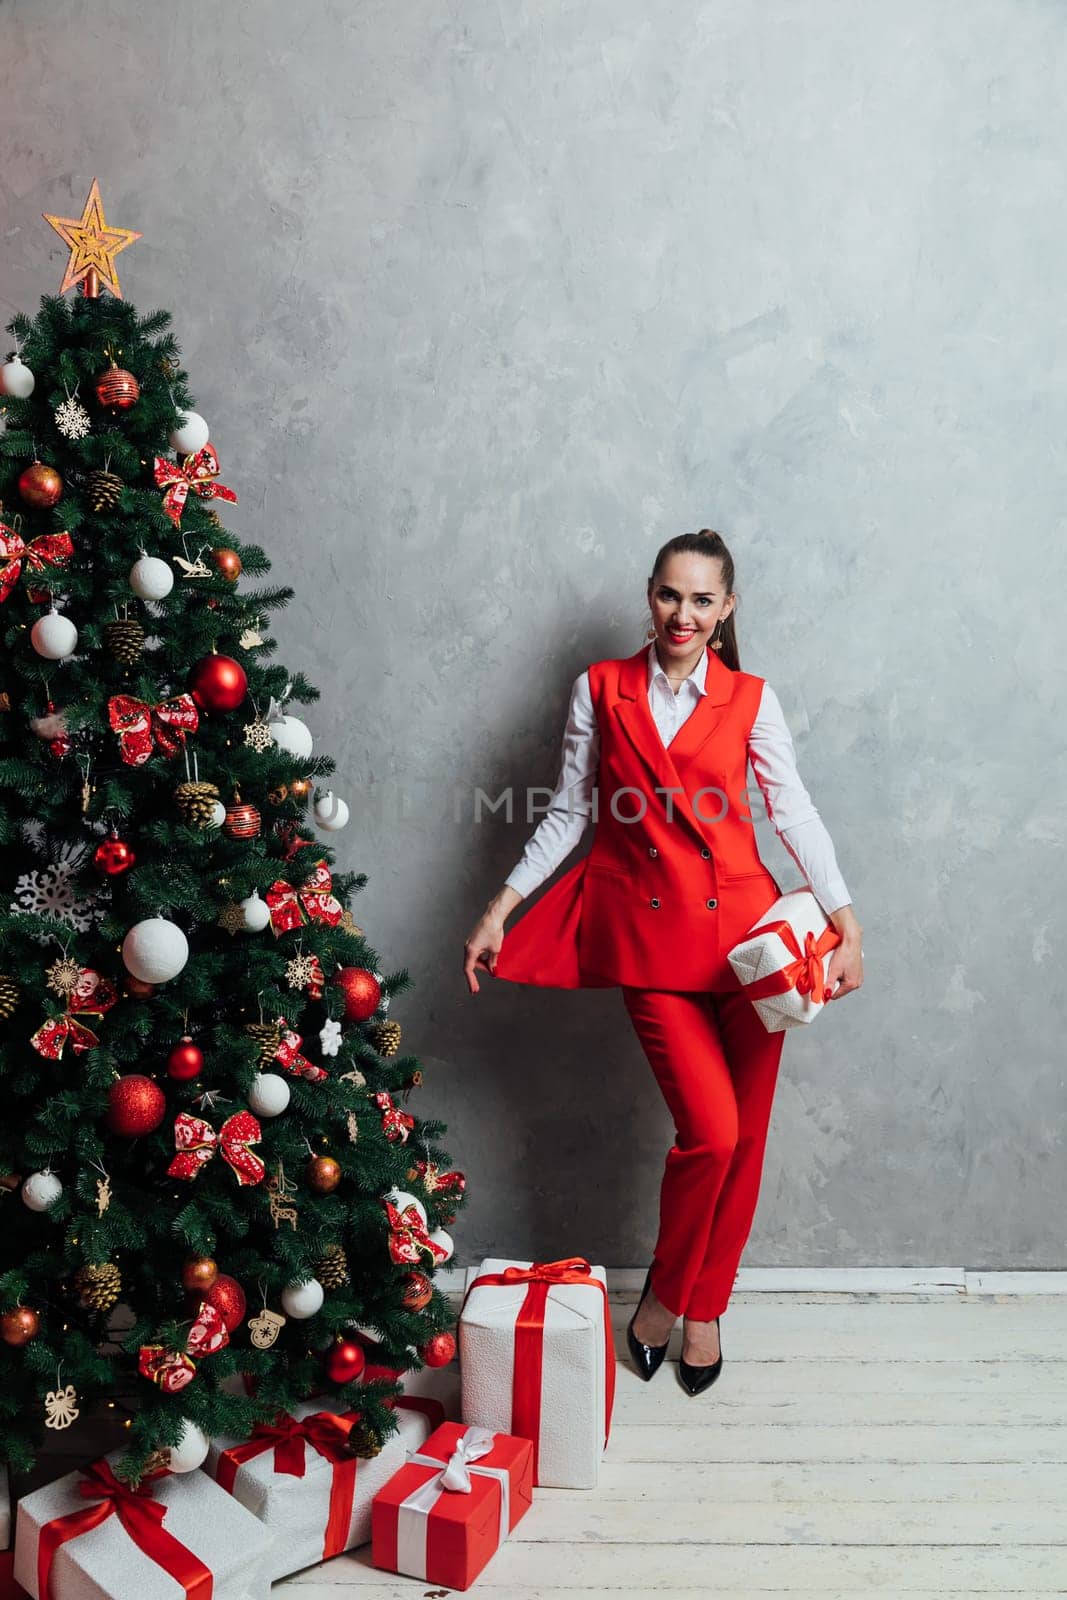 Woman decorating christmas tree with gifts for new year by Simakov